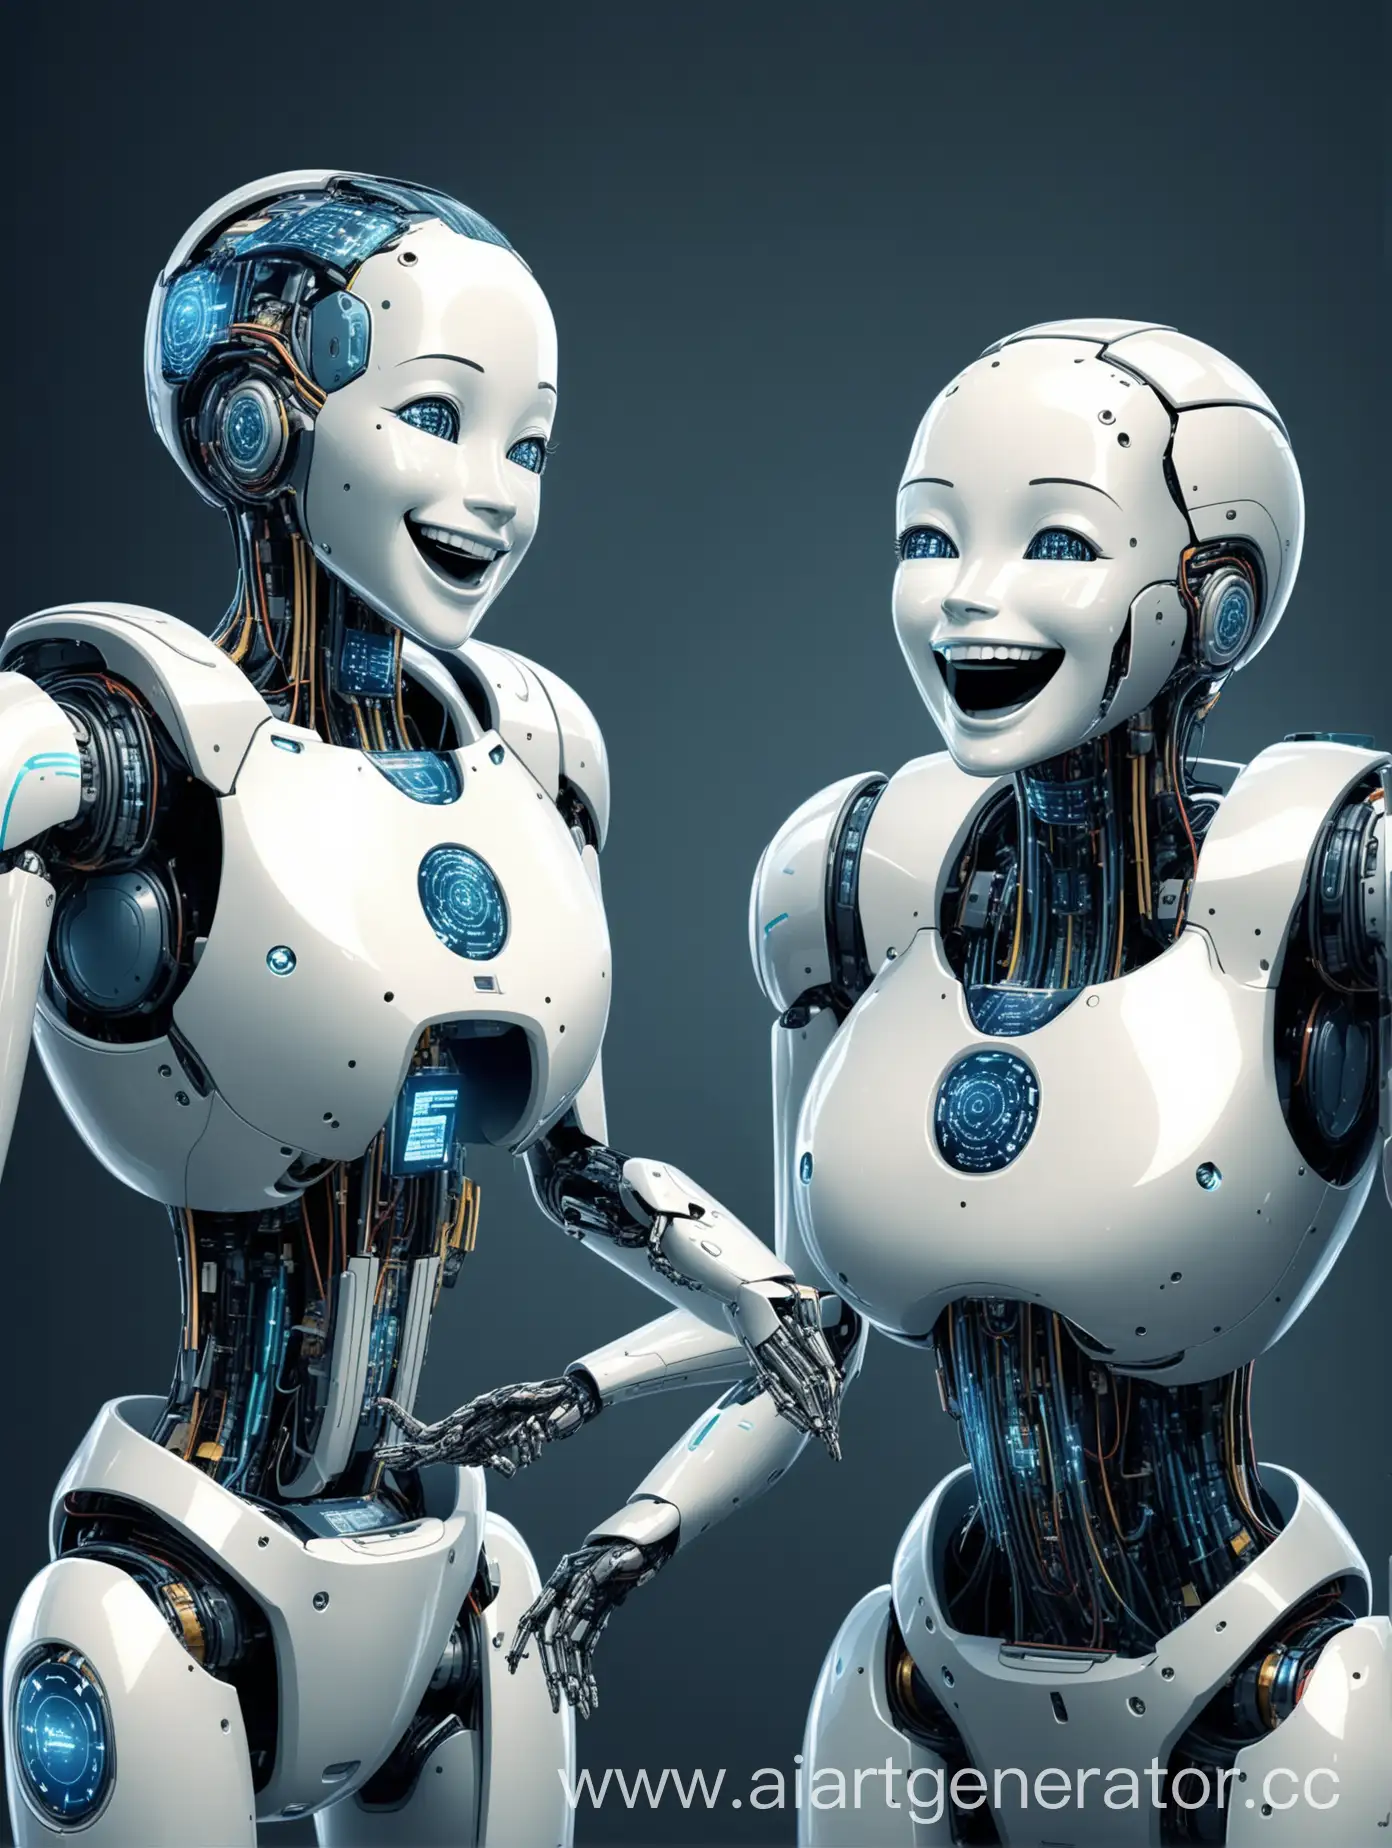 two highly advanced artificial intelligences laughing intriguengly